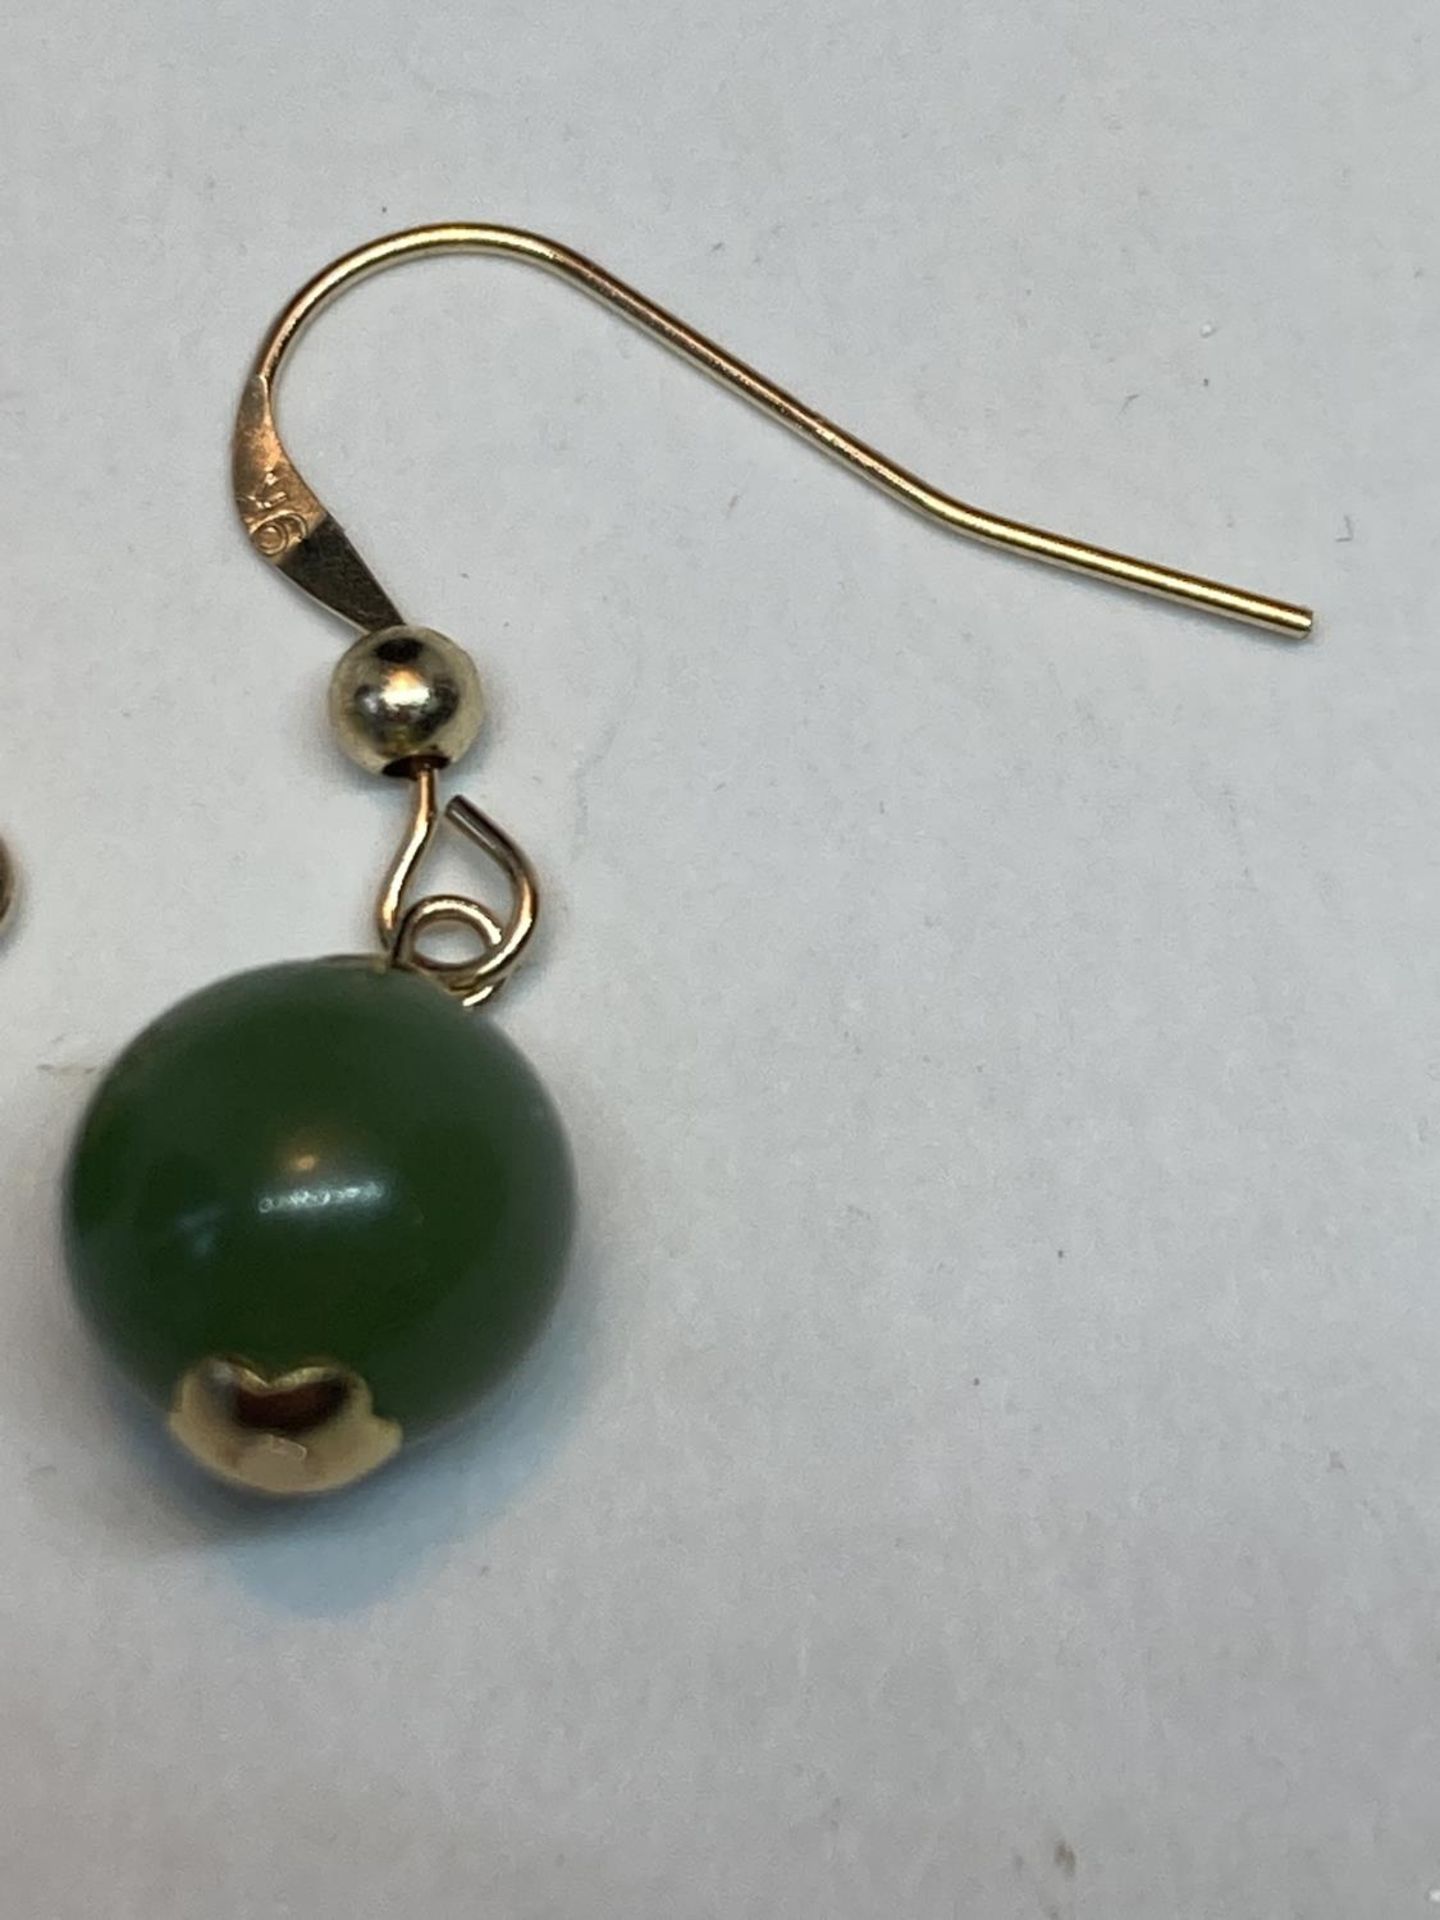 A PAIR OF MARKED 9K EARRINGS WITH GREEN CHALCEDONY STONES - Image 6 of 8